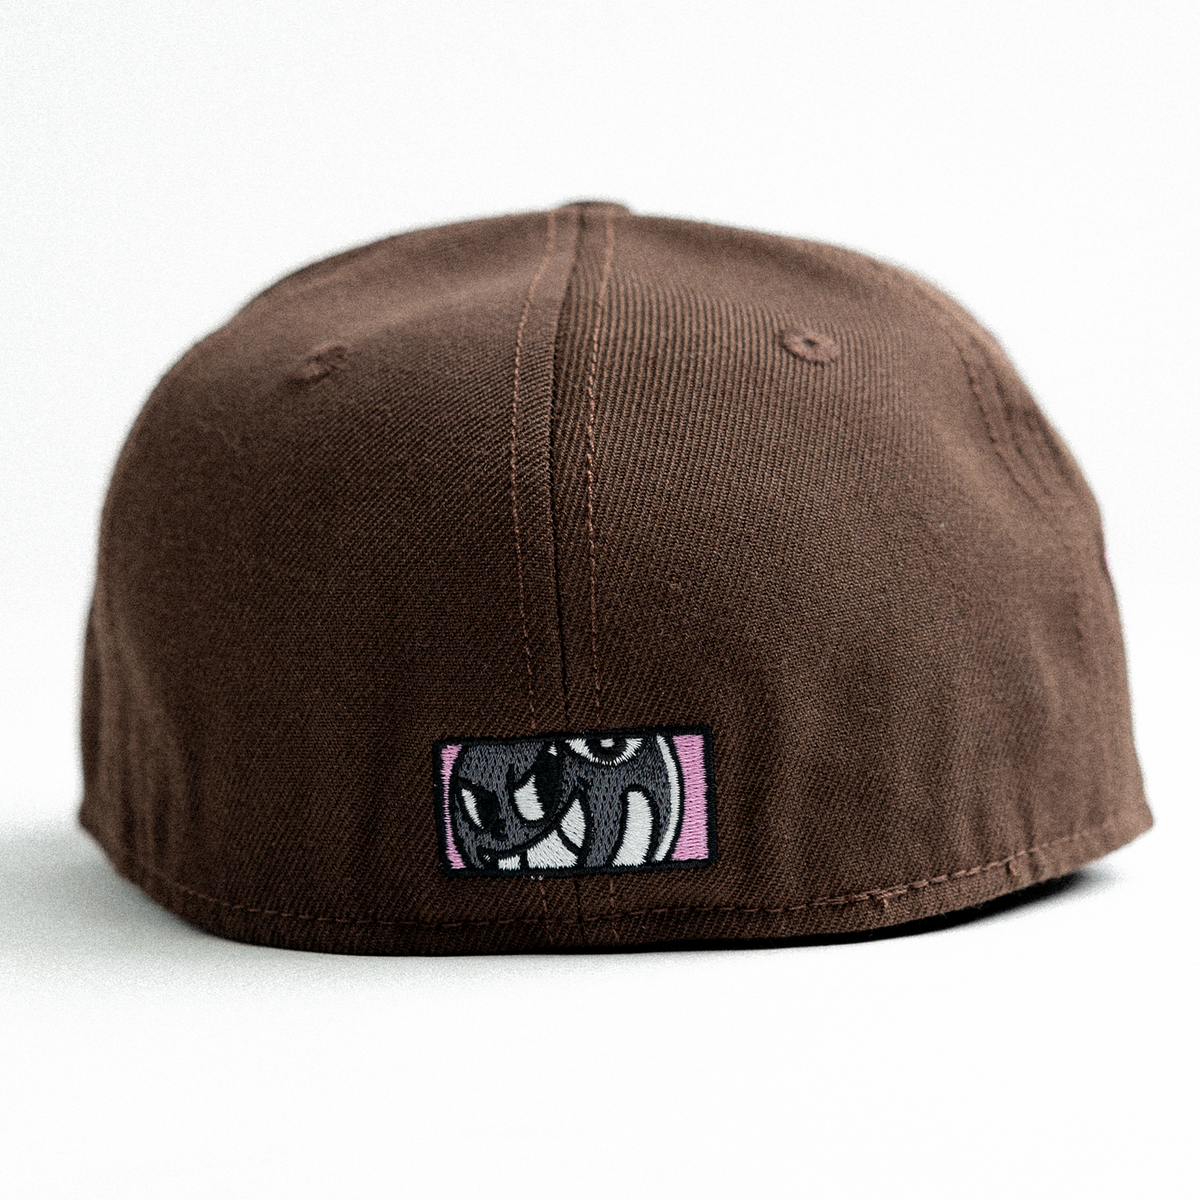 Fitted Hat Brown / Pink - 7 1/8